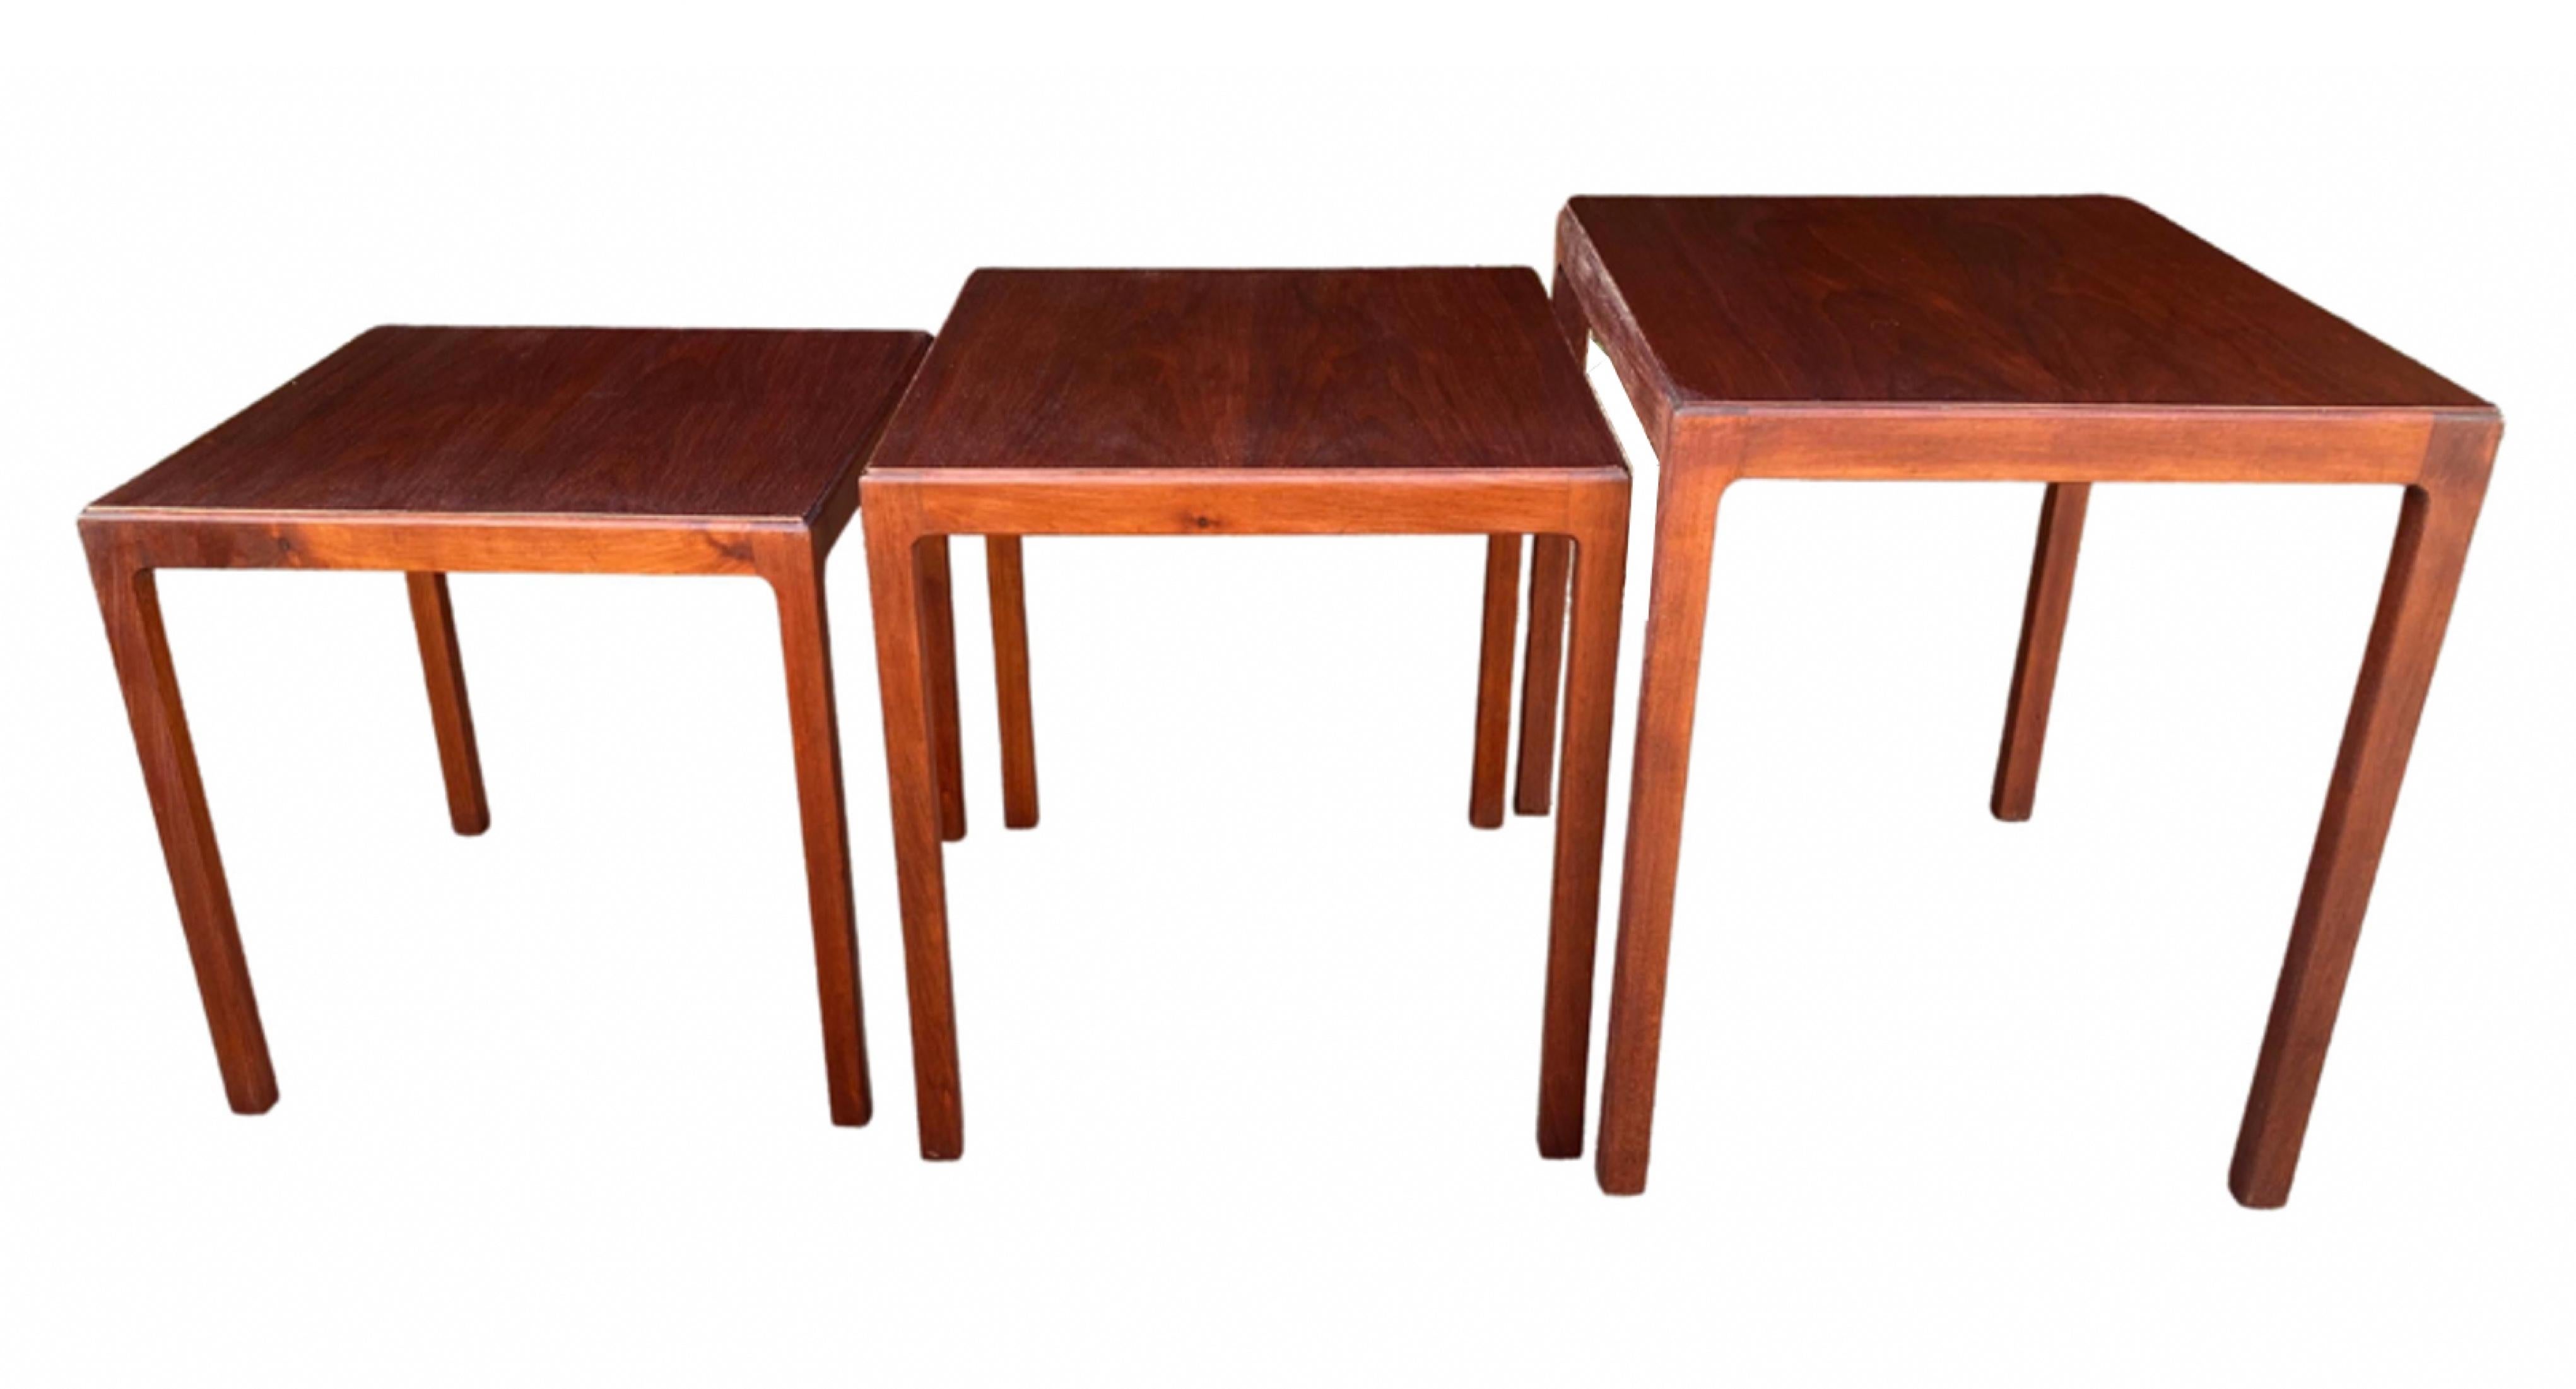 Set of 3 nesting tables in mahogany In Excellent Condition For Sale In Copenhagen, DK